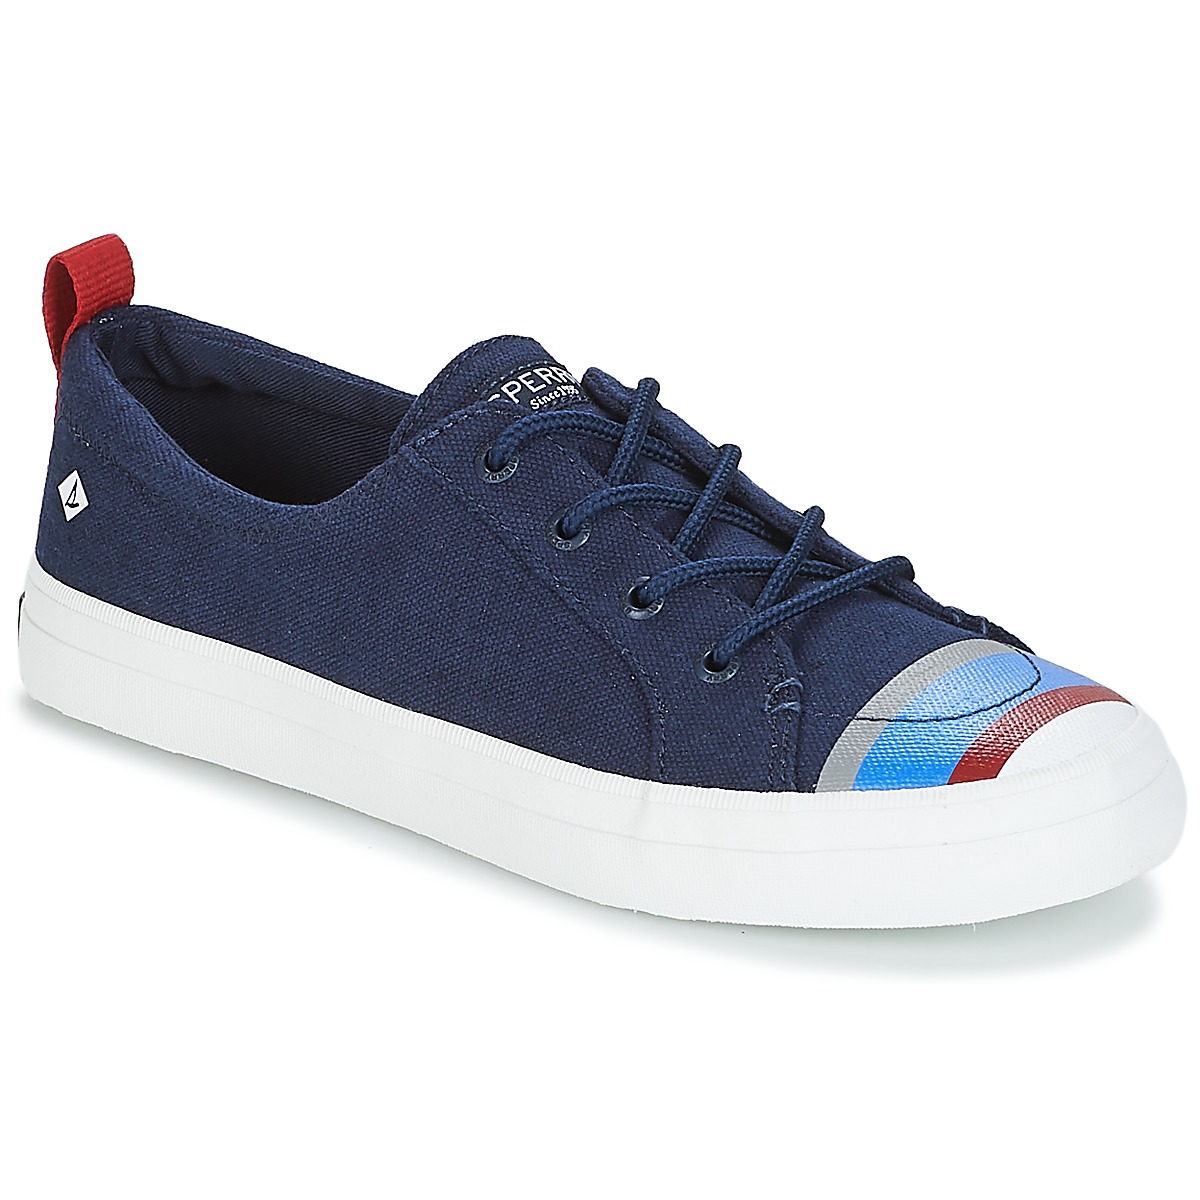 Xαμηλά Sneakers Sperry Top-Sider CREST VIBE BUOY STRIPE Ύφασμα 6808697F